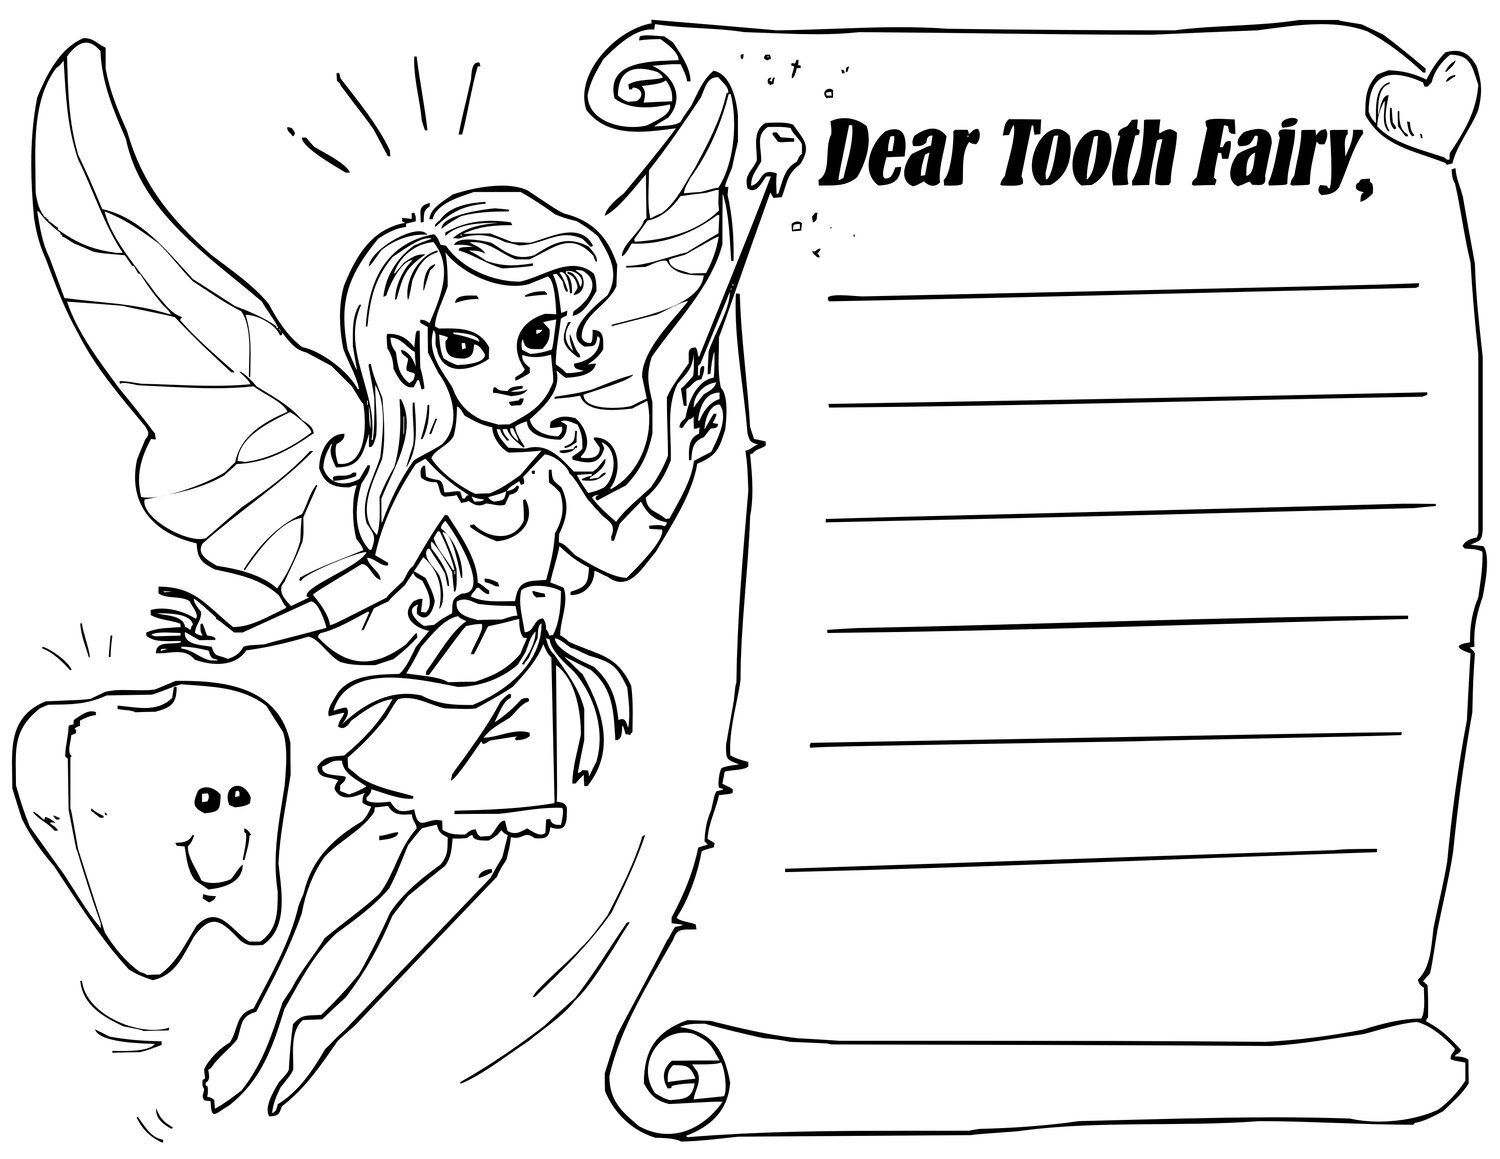 Tooth coloring pages â sew cute patterns